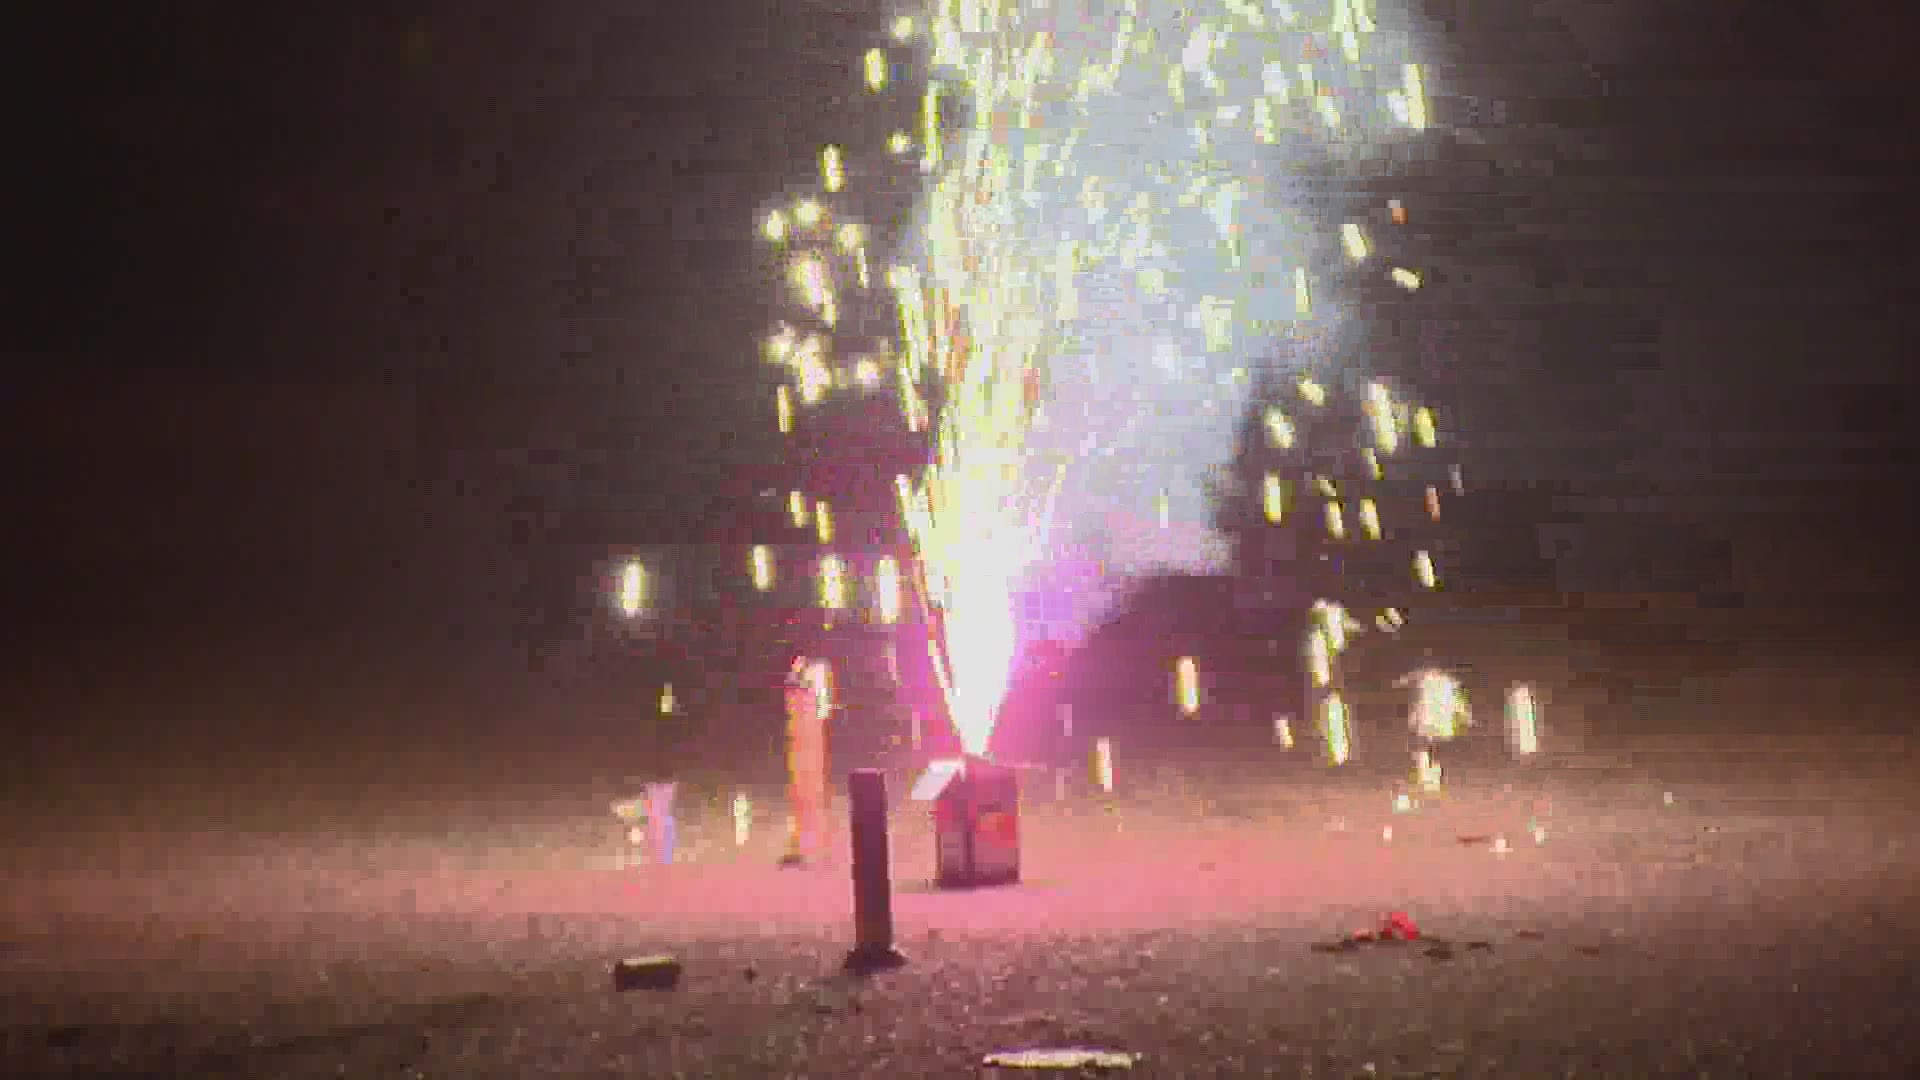 Spectrum Health issues safety warning about home fireworks shows on 4th of July